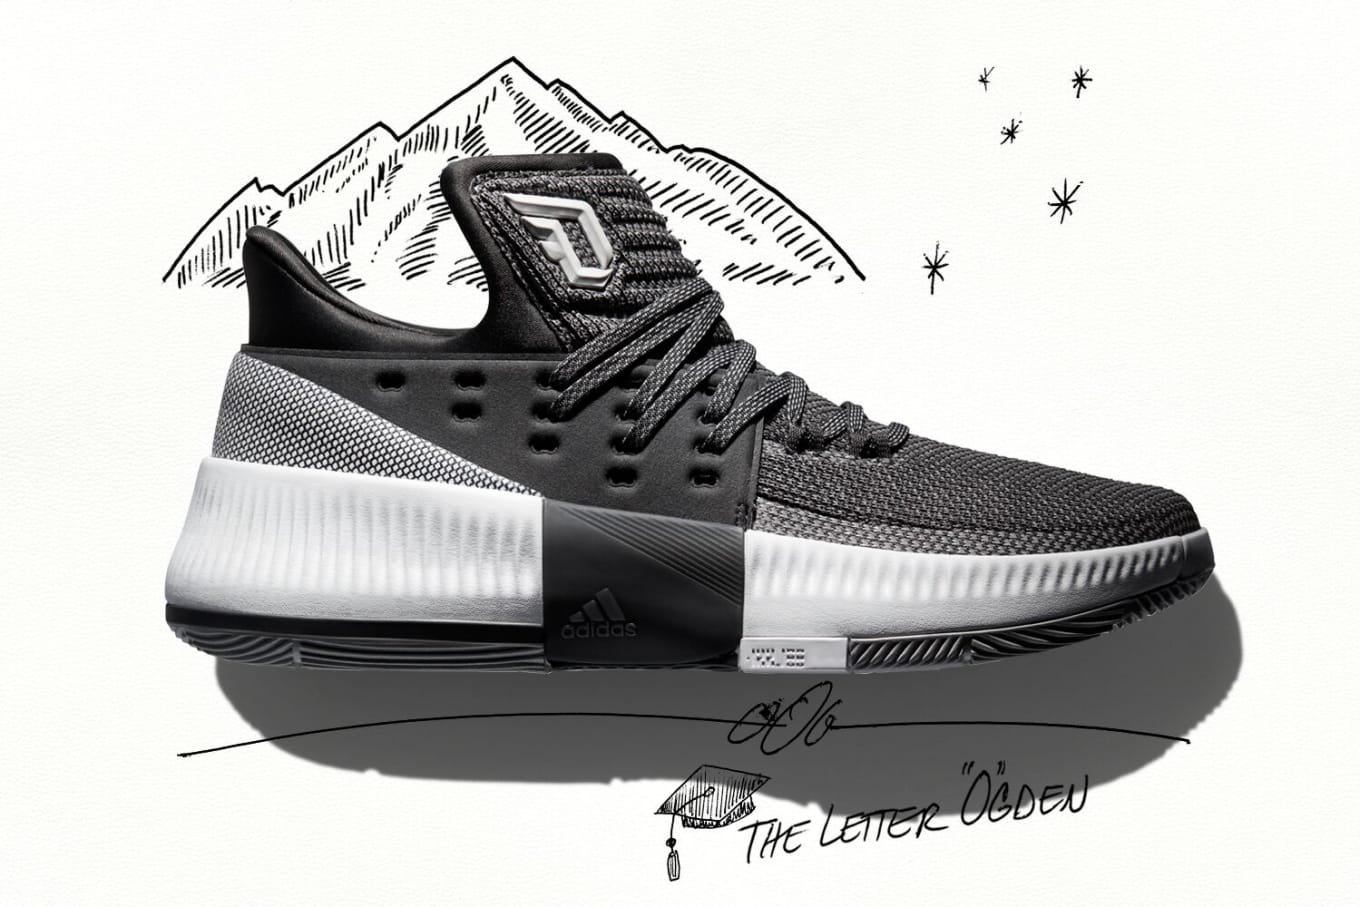 adidas dame 3 shoes